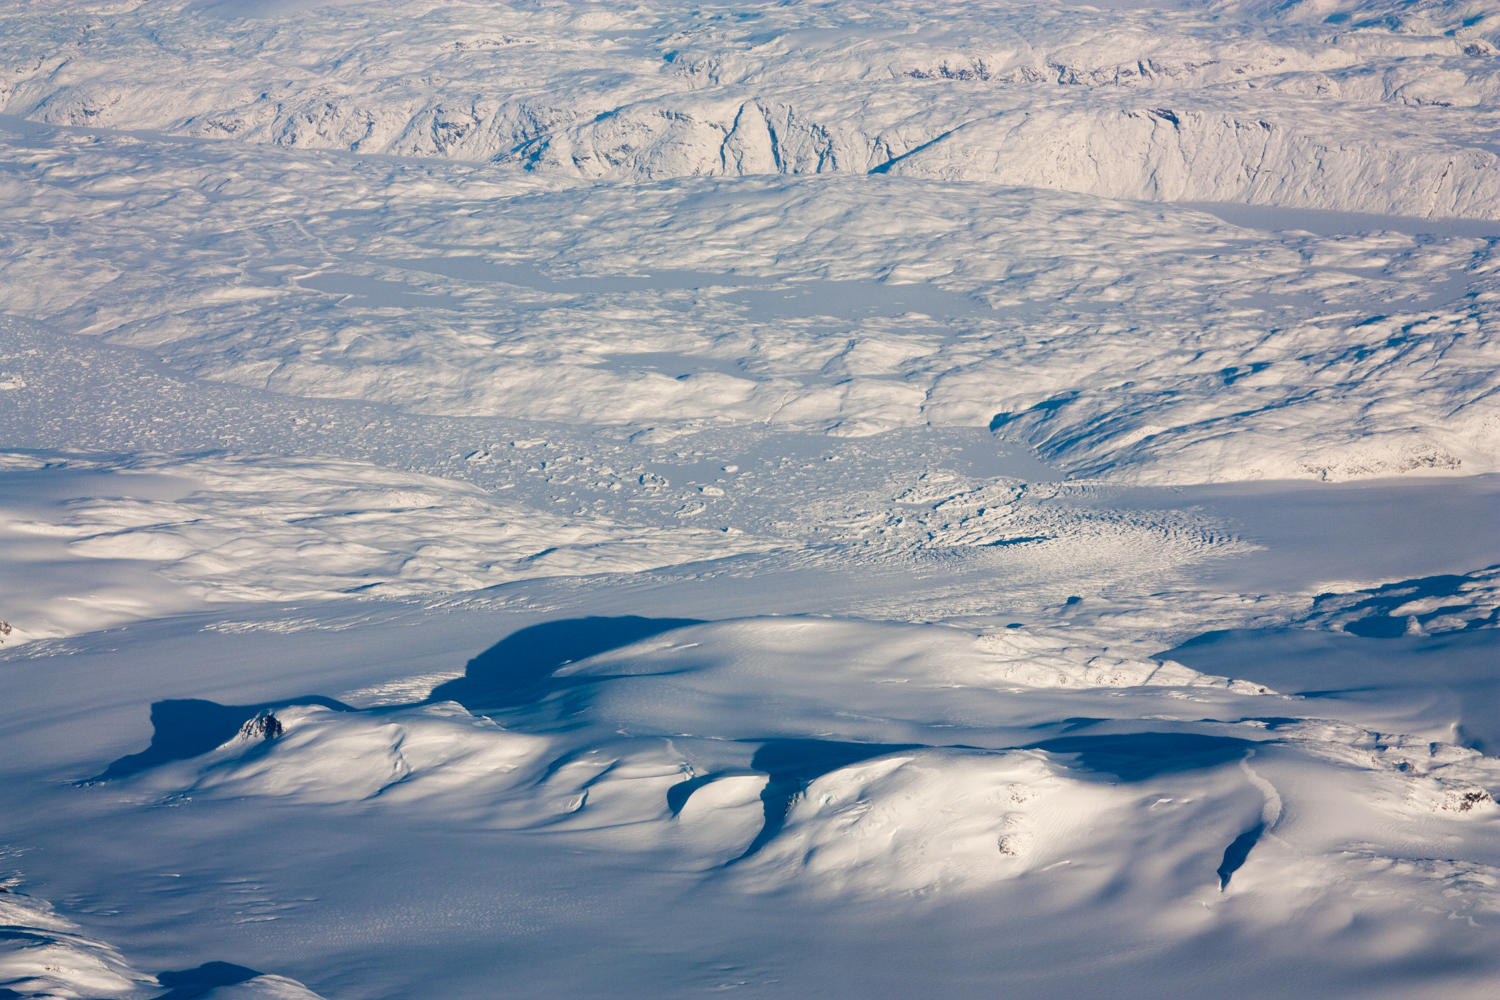 View of the ice along the coast of Greenland as seen from the flight (Photo credit: Luke Trusel) 